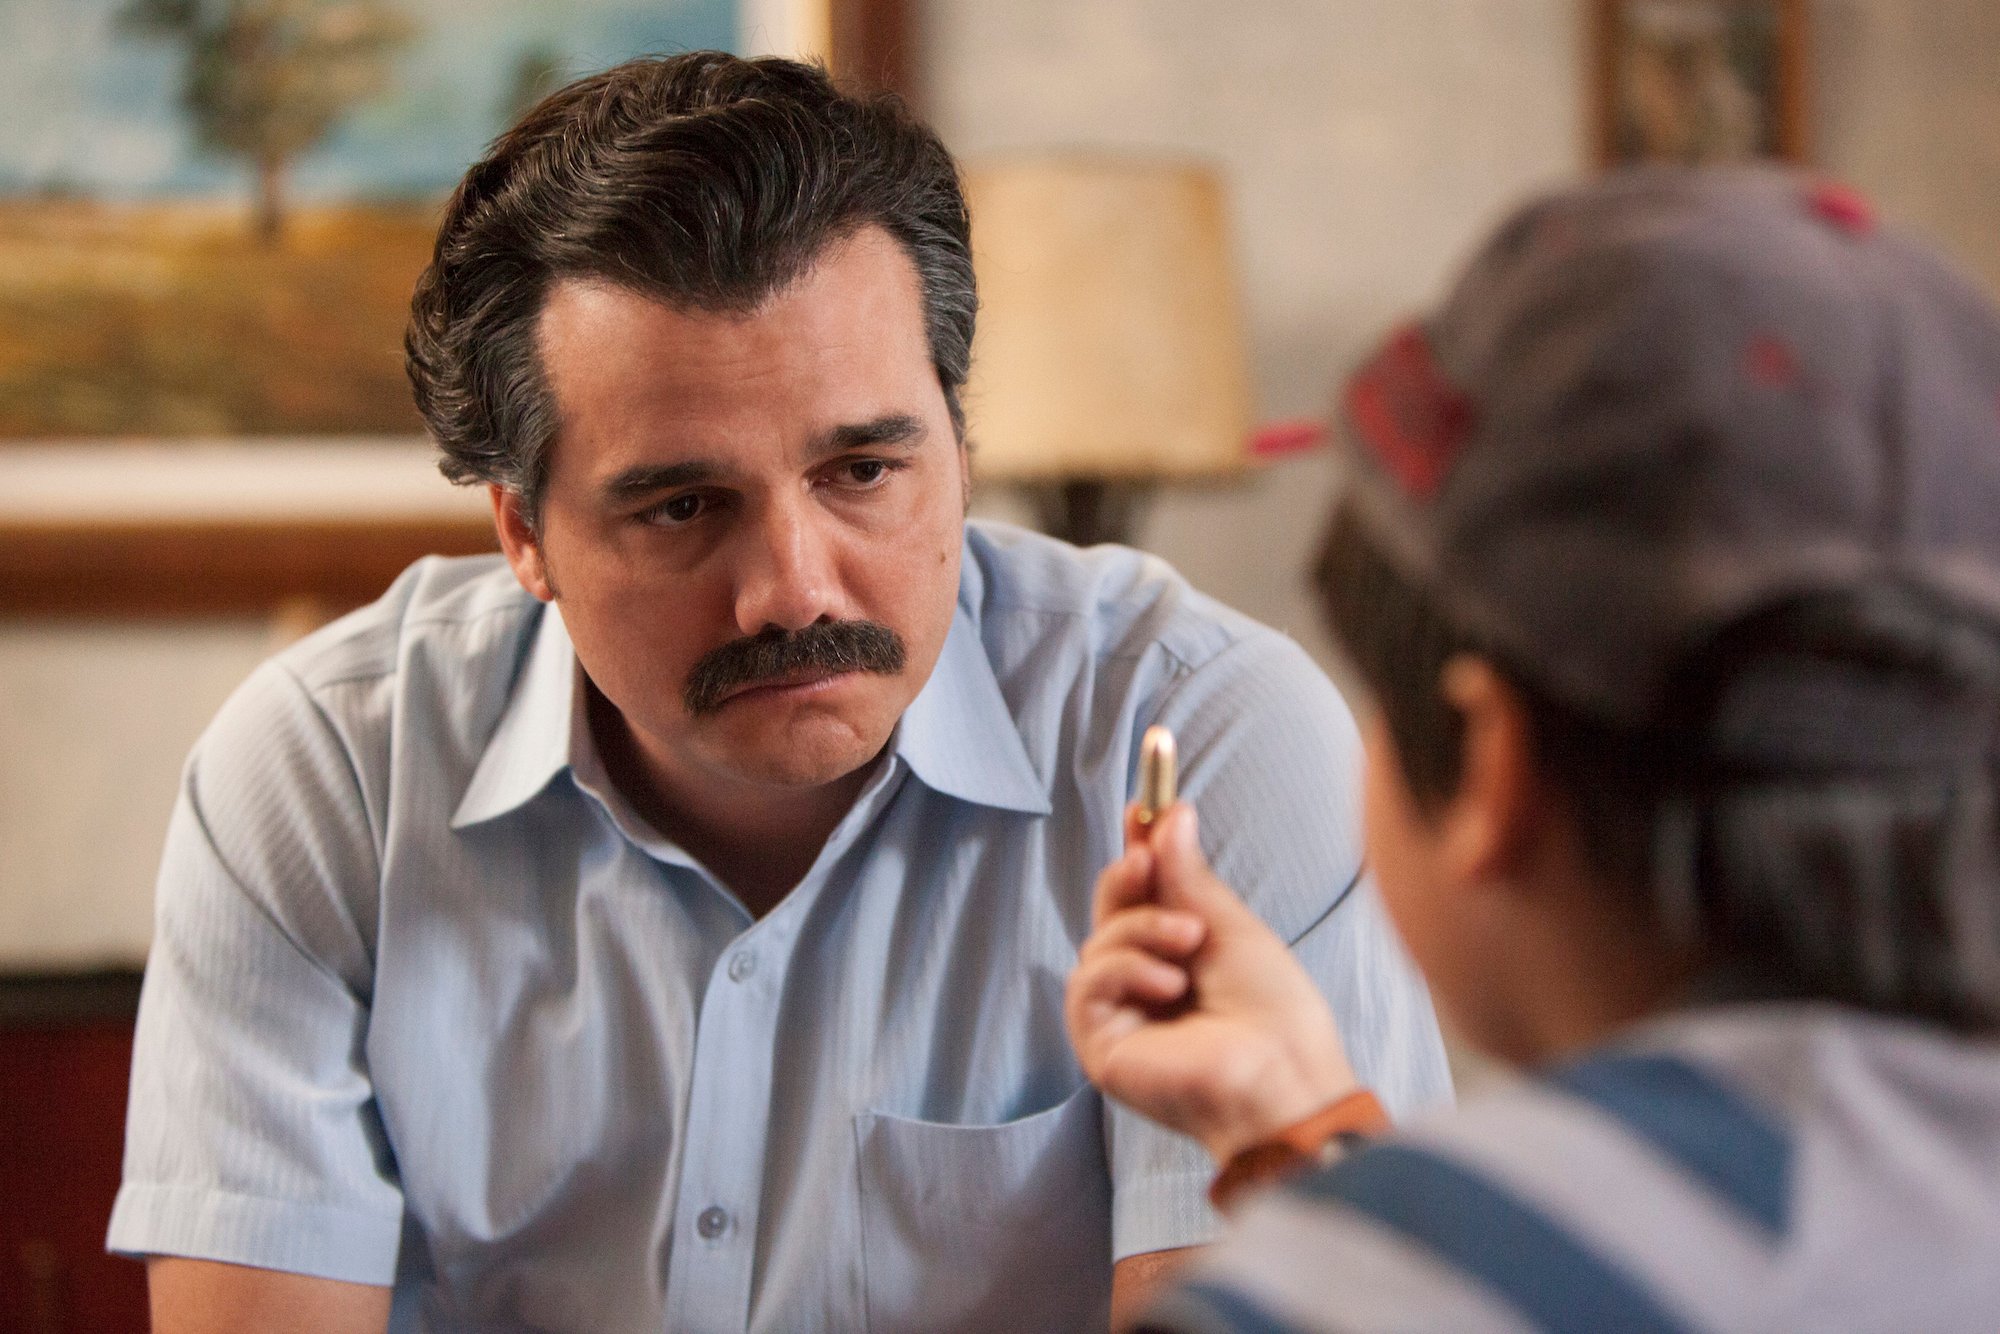 Narcos: Mexico': Do Viewers Have to Watch 'Narcos' First?